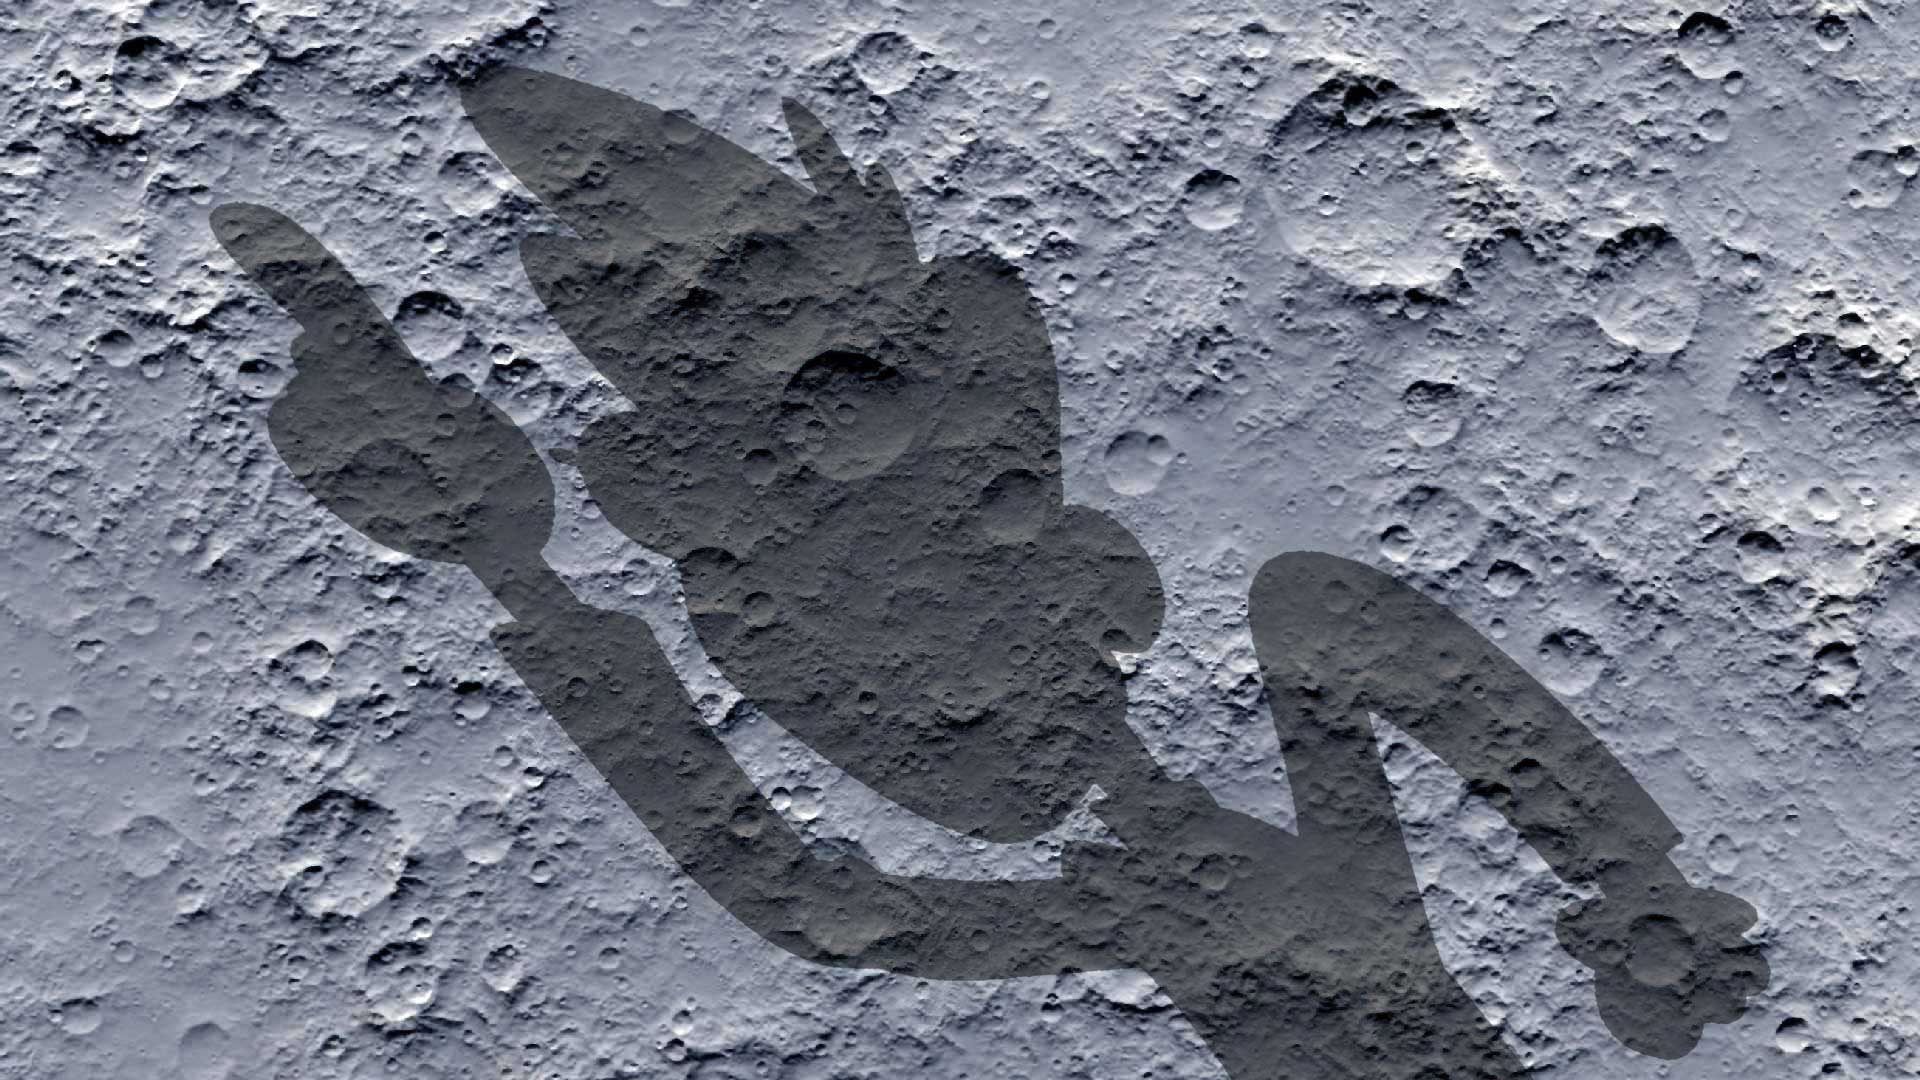 A shadow of Walter on the Moon